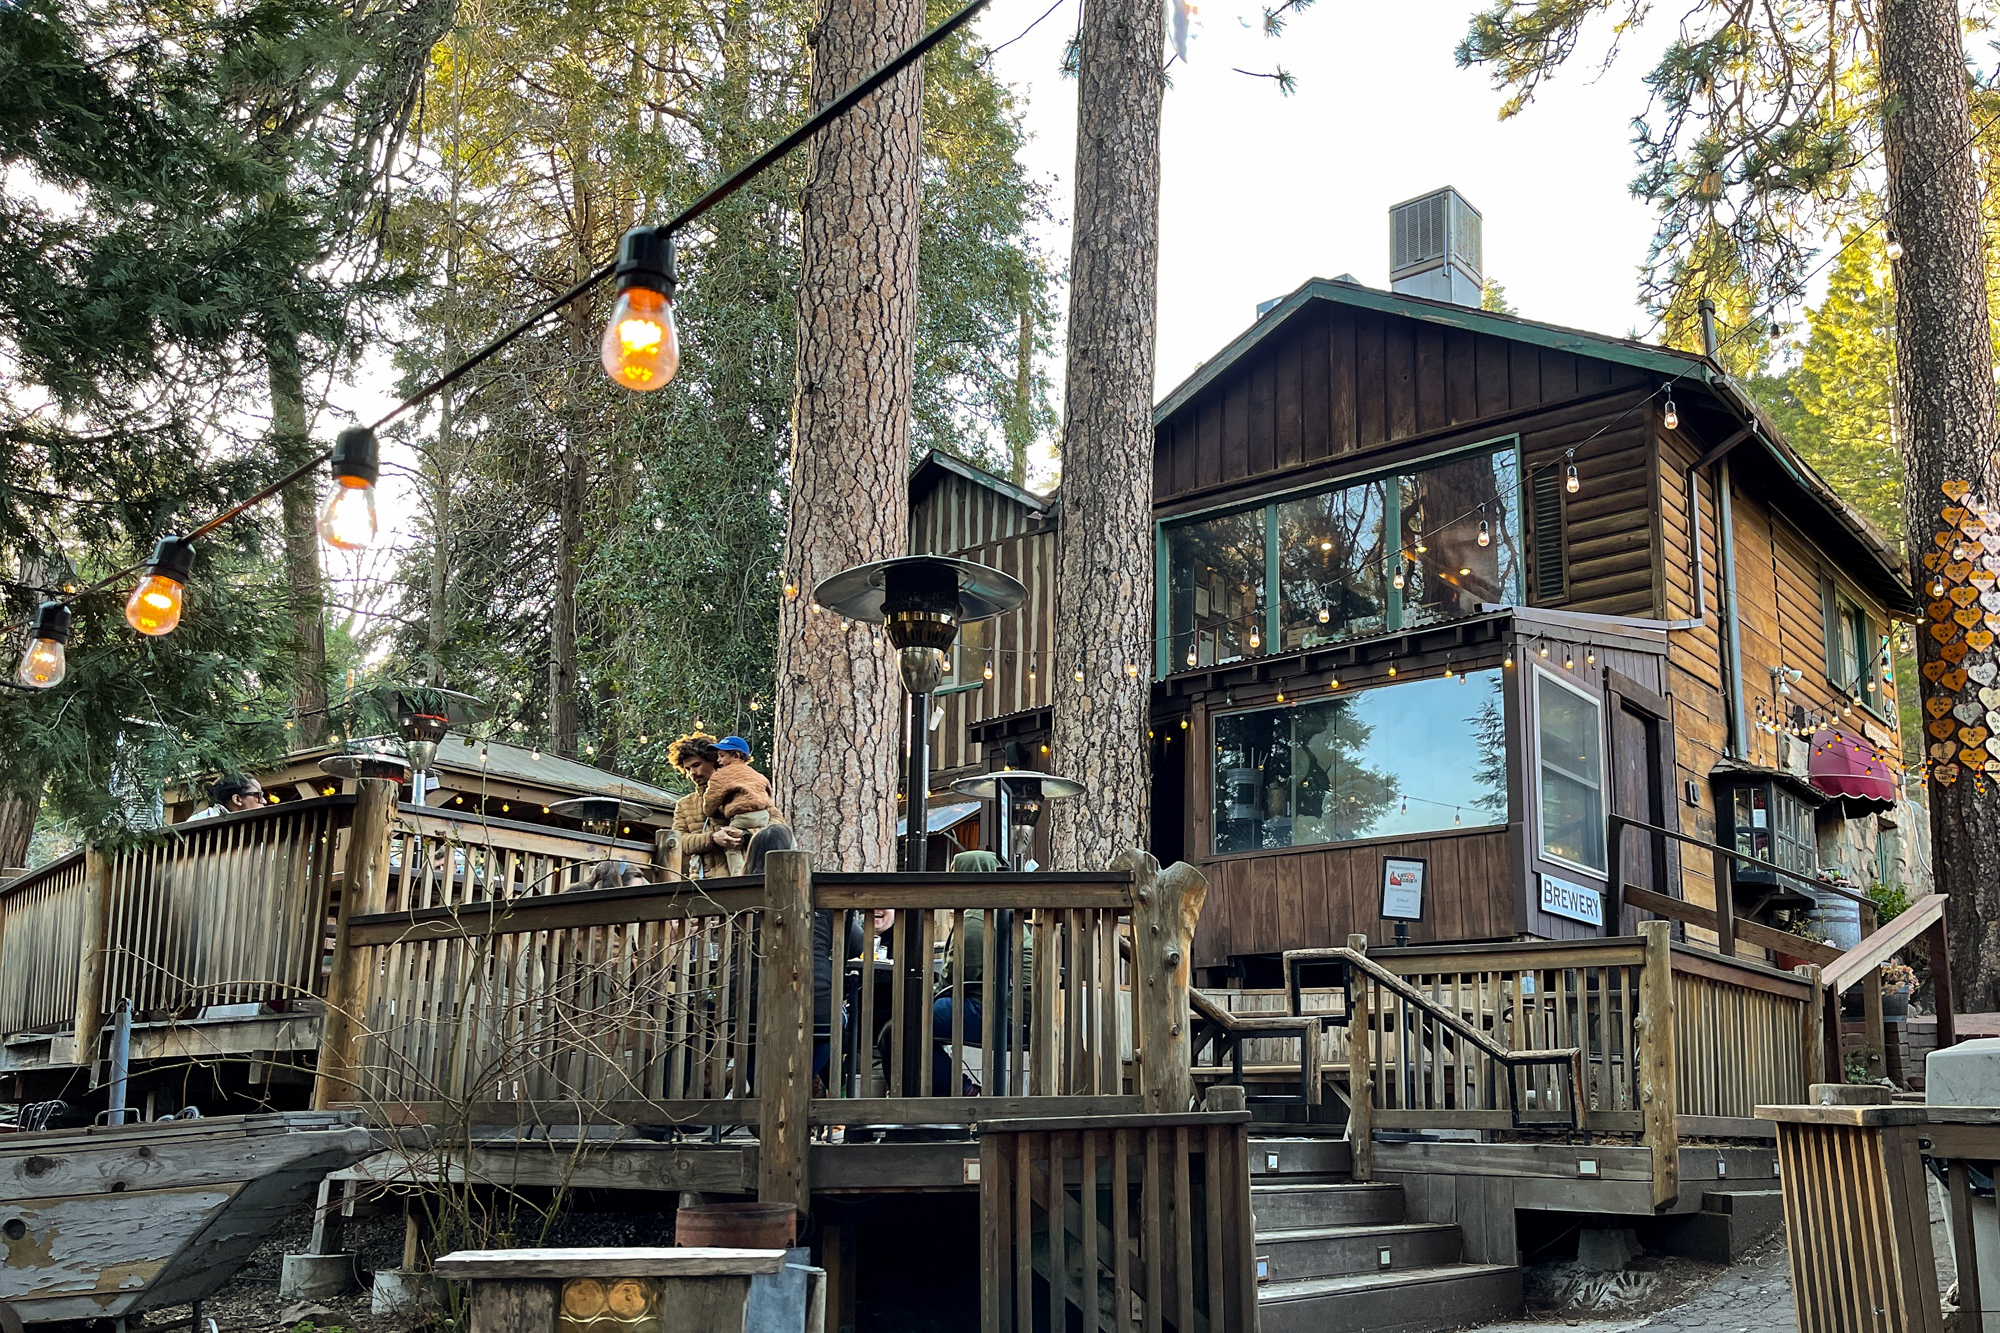 Exterior view of the alpine style building and deck of Lou Eddie's dining establishment in Lake Arrowhead, California.